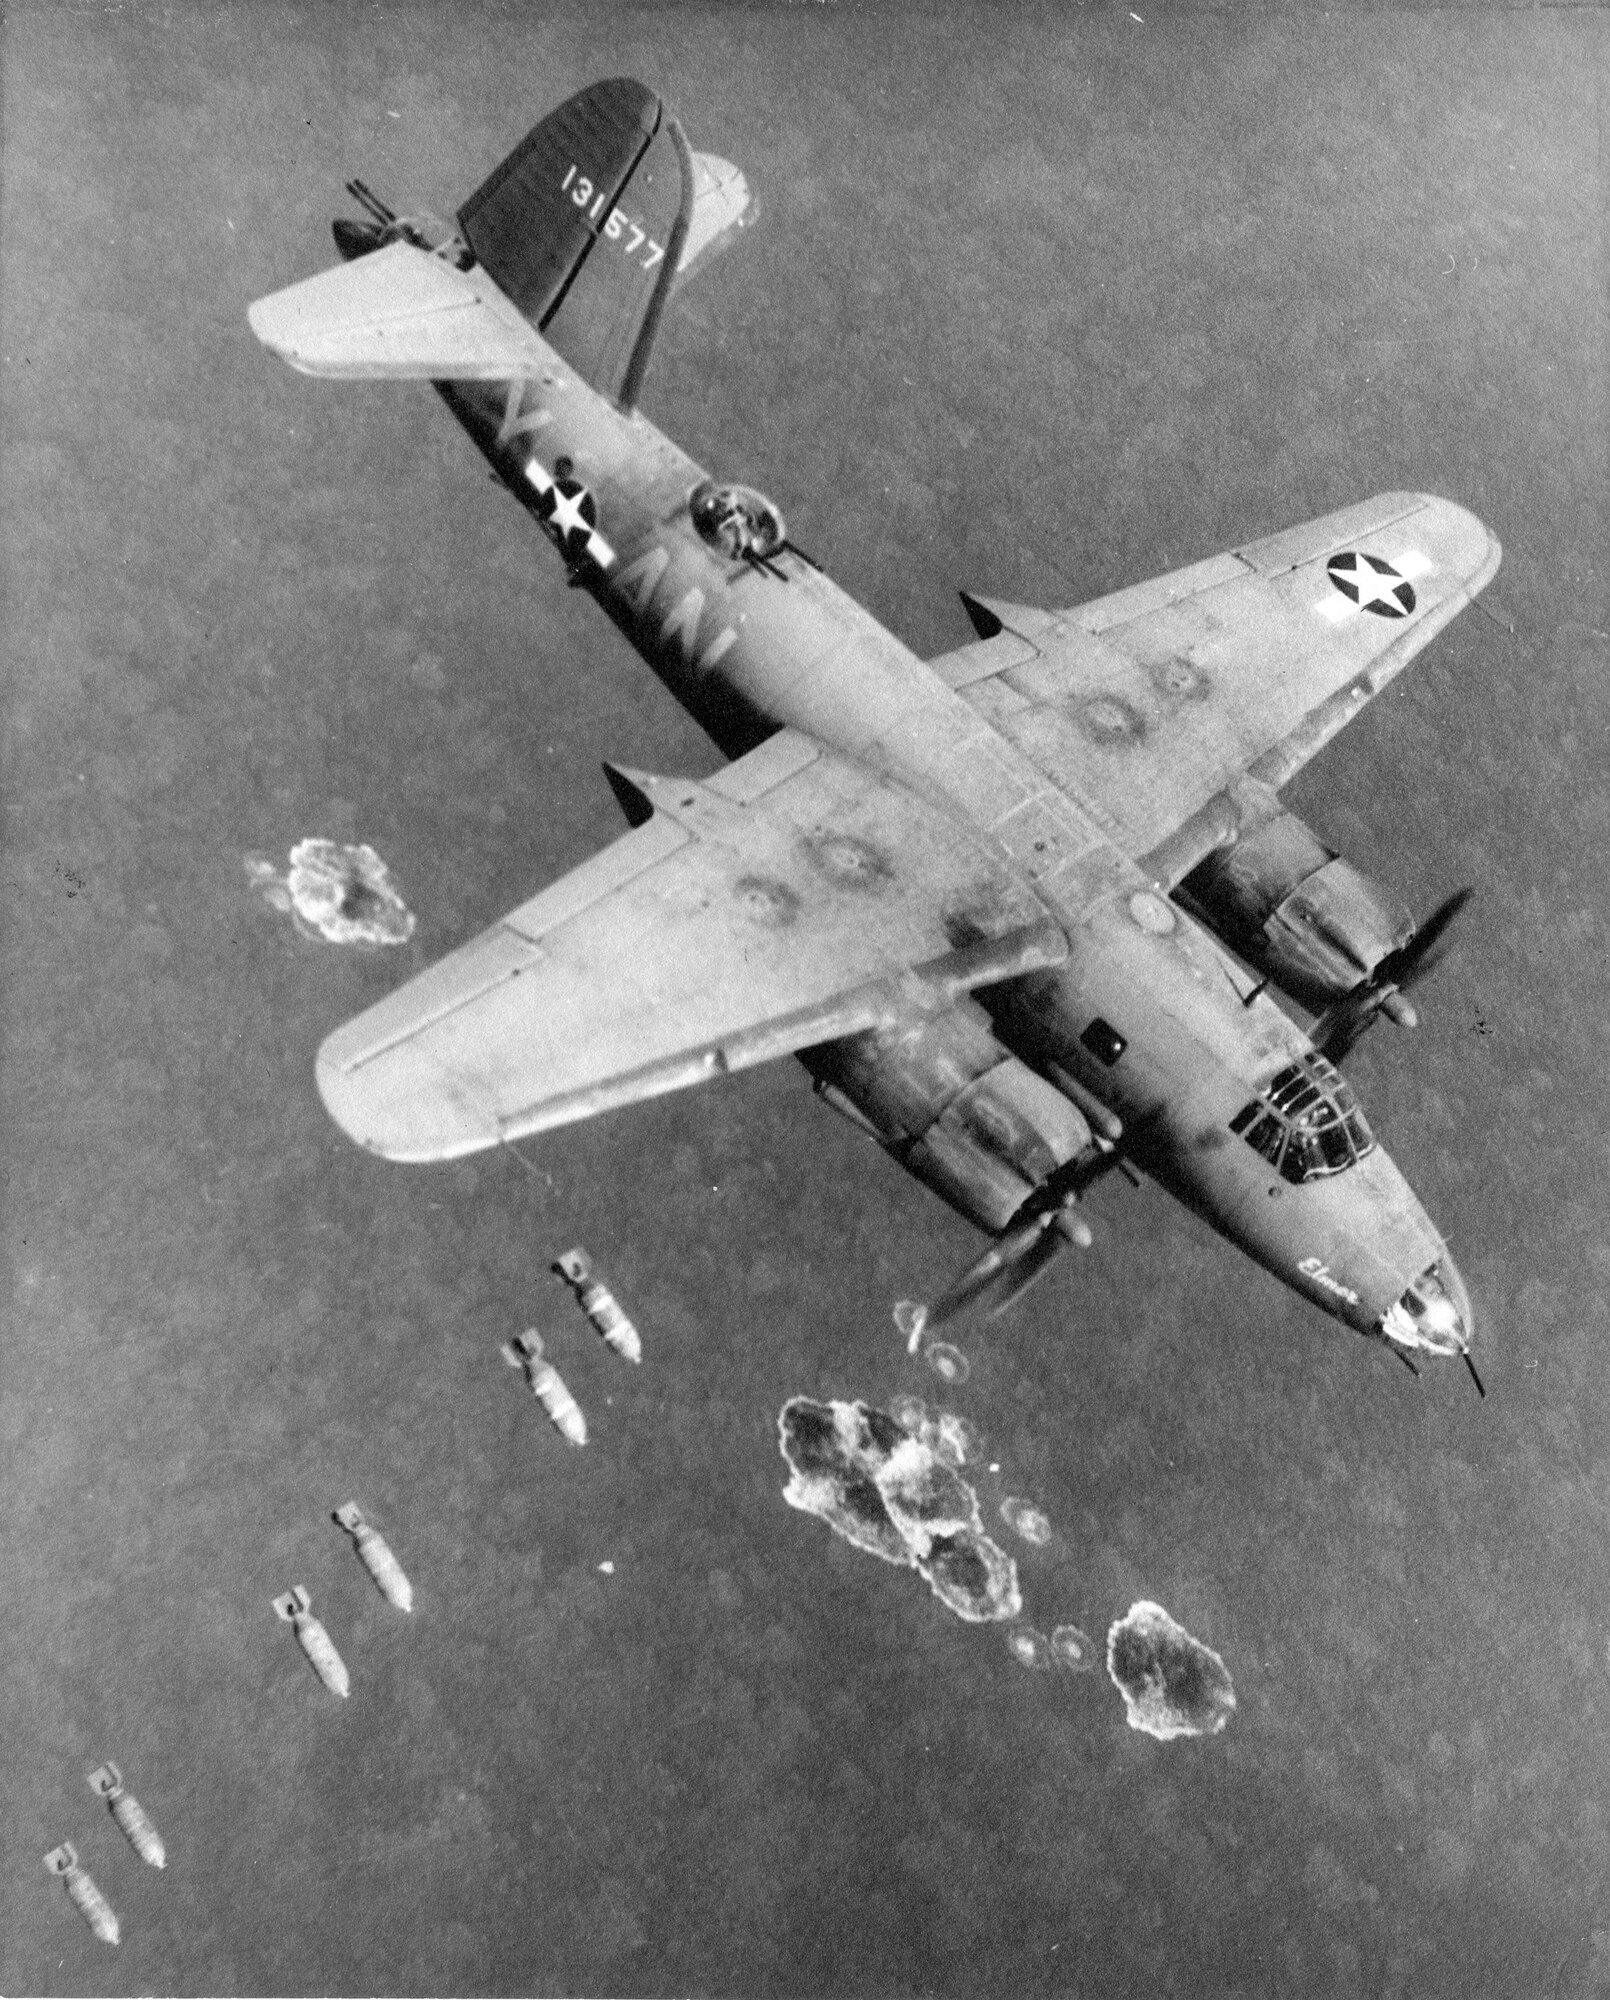 During its 21 months of combat operations, the group launched 396 combat missions.  It delivered 16,280 tons of bombs onto enemy targets. Nearly 100 of the group's aircraft were either shot down or damaged beyond repair, over 300 airmen were killed or reported missing in action and another 217 were wounded. (Courtesy photo)